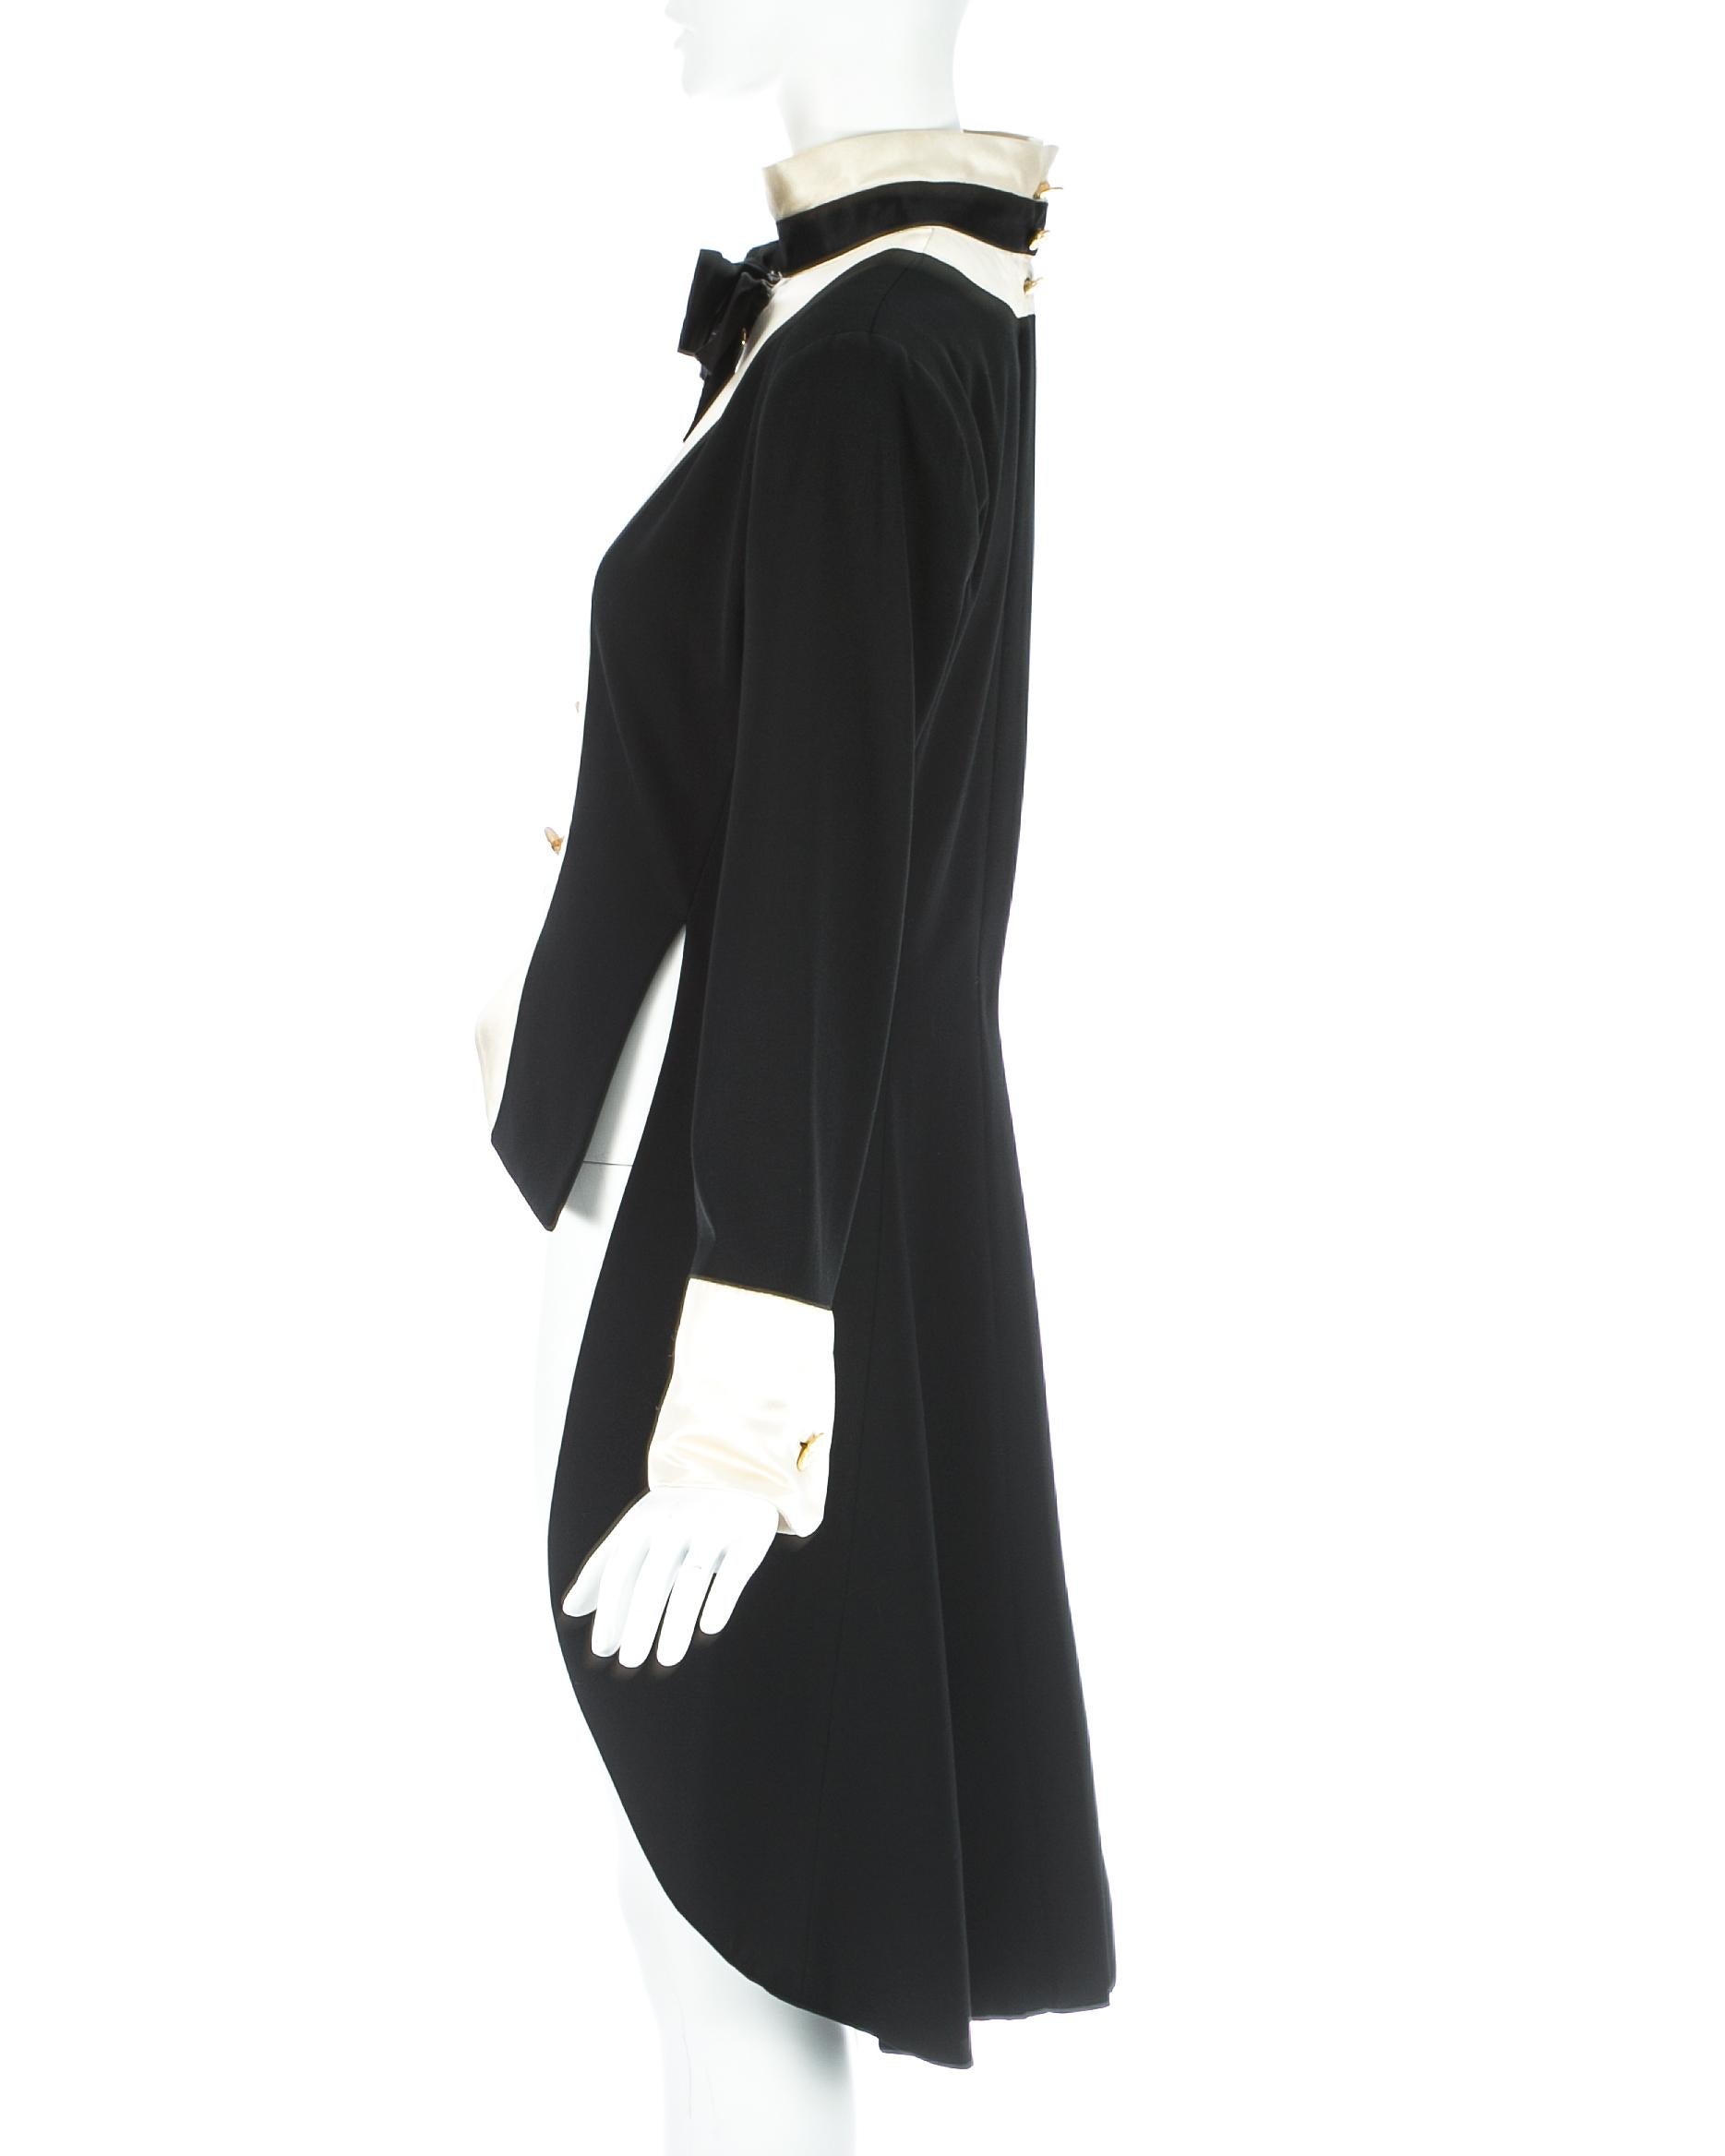 Women's Chanel by Karl Lagerfeld black wool and silk evening tail coat / dress, c. 1980s